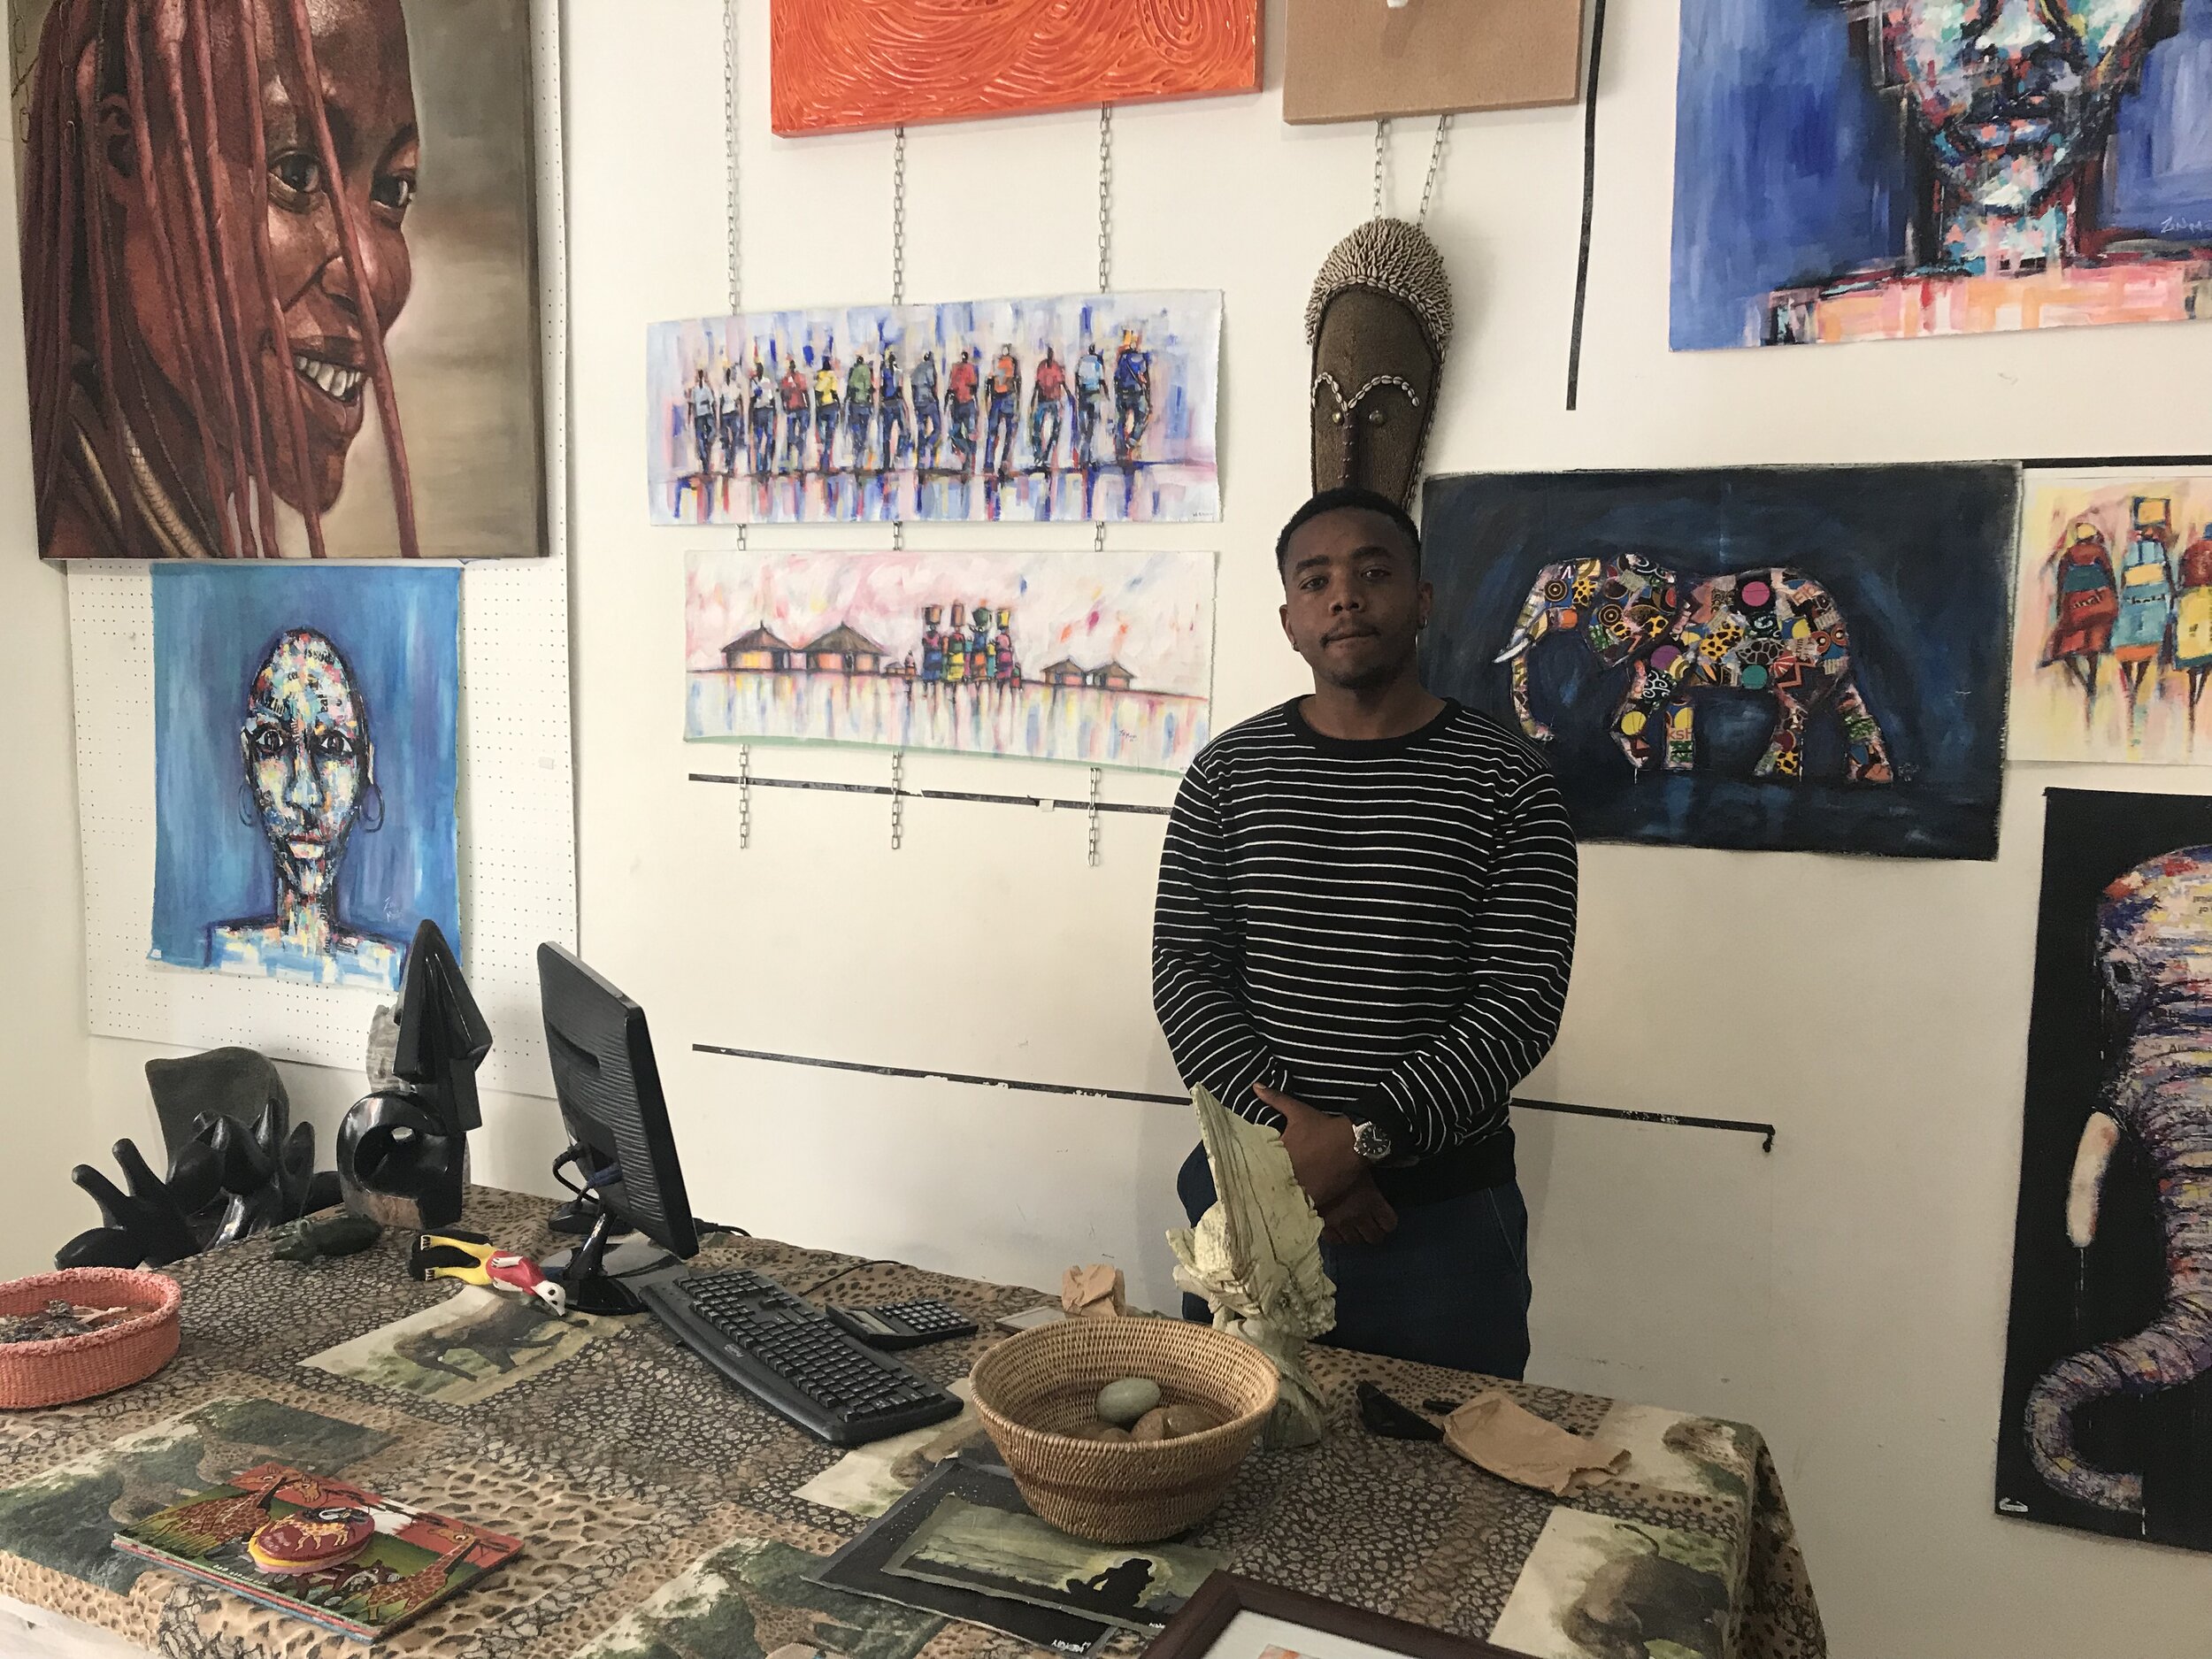  Toivo, a young sculptor who runs an art gallery, remarked that if he make excuses for ourselves “the world will not show pity for us”.  